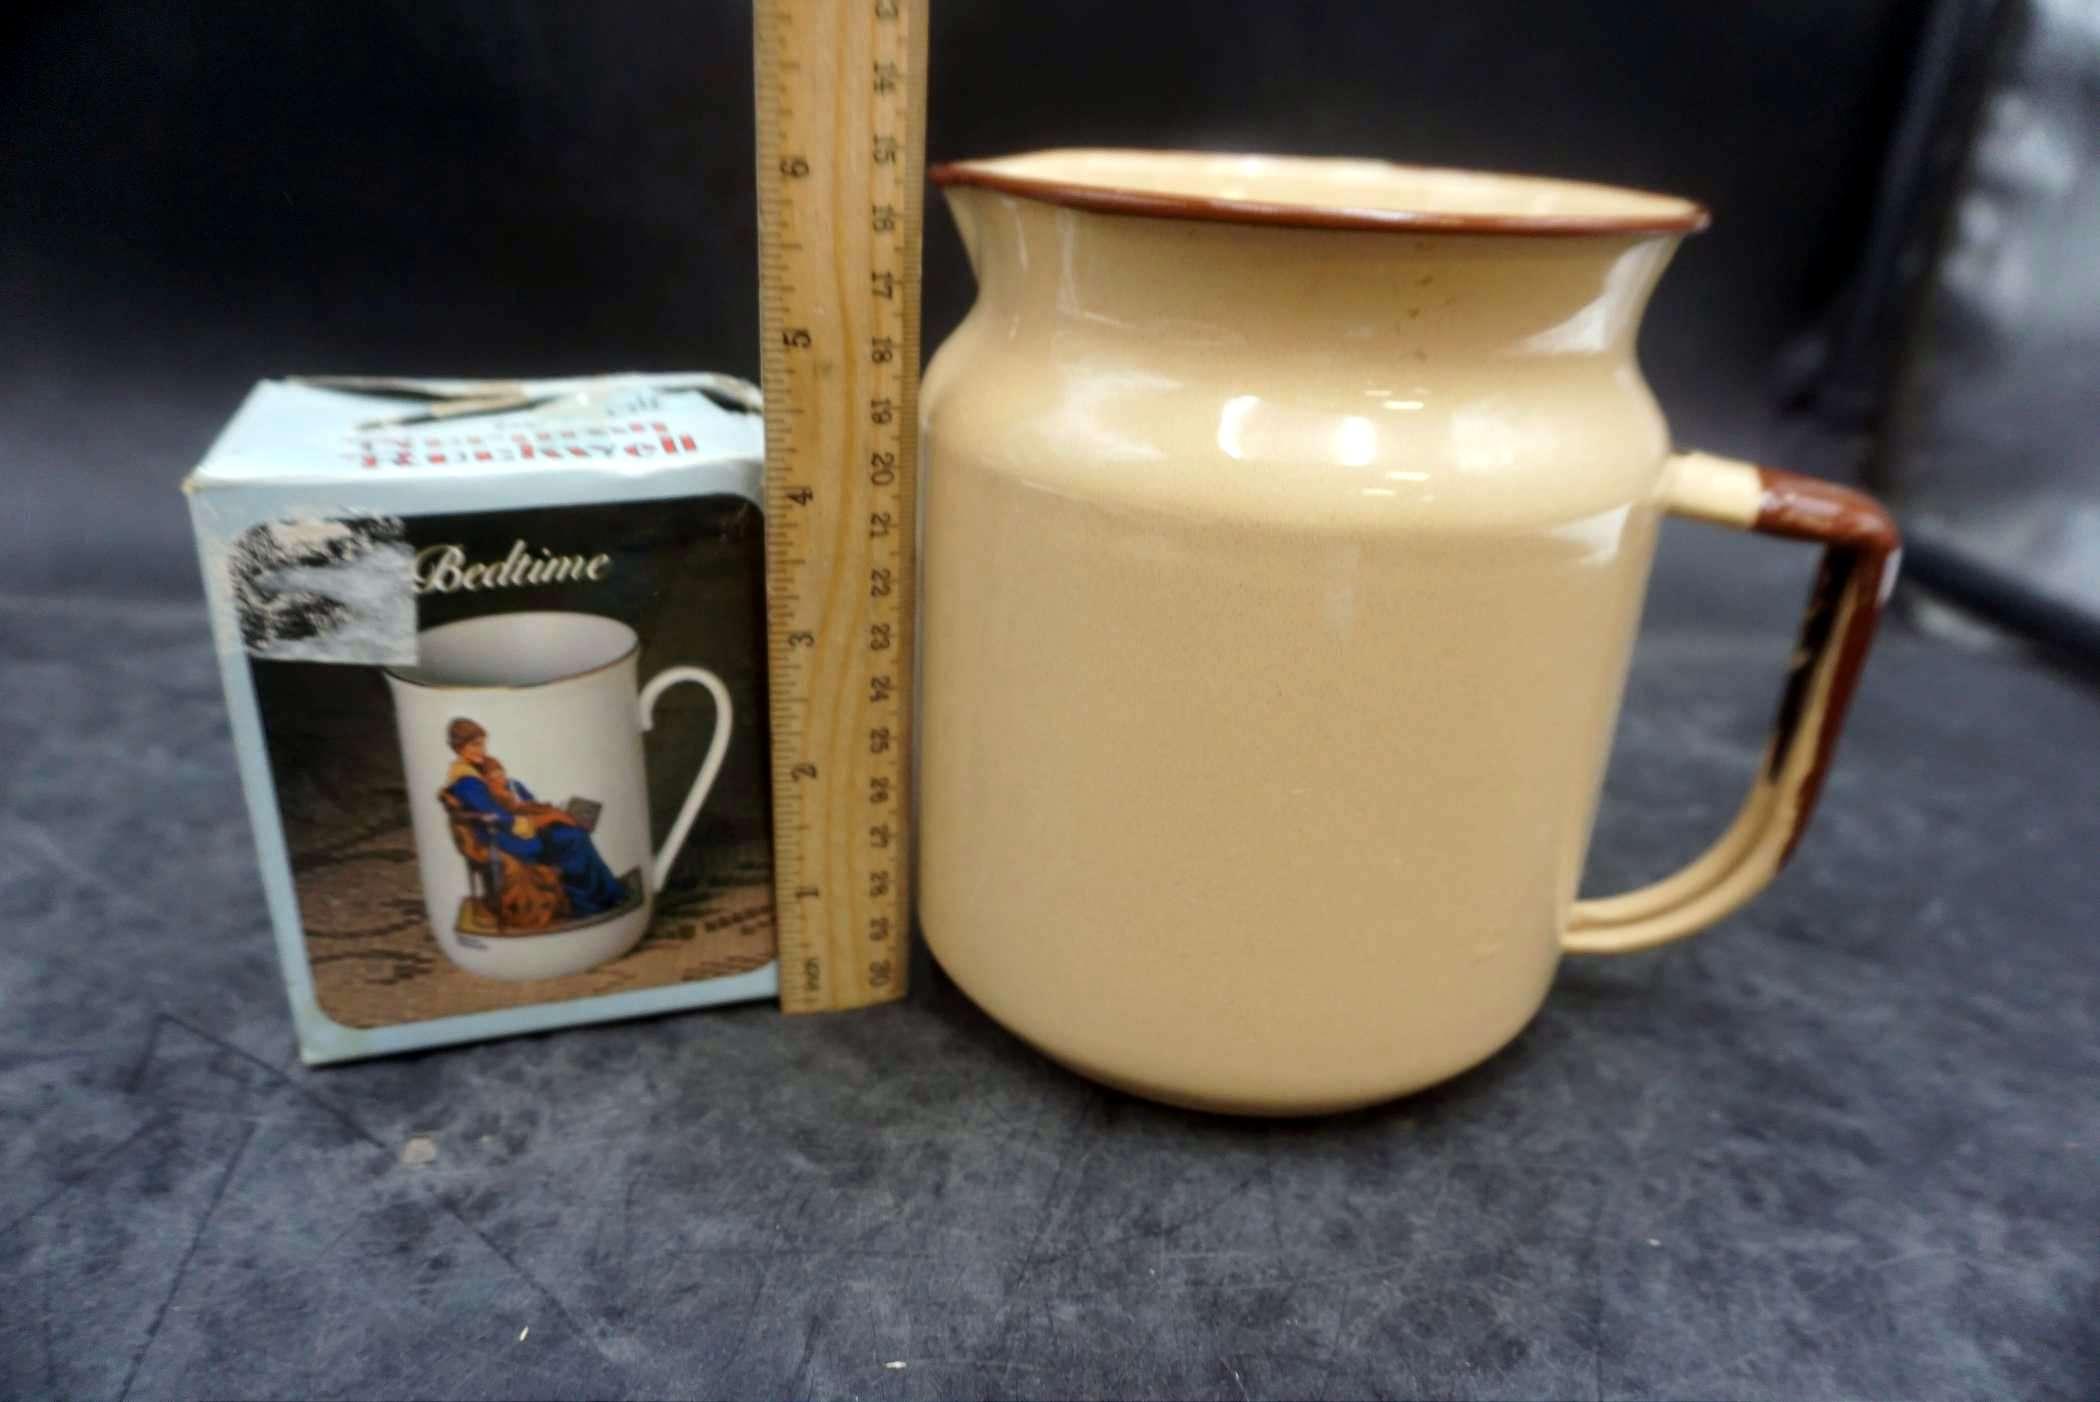 Bedtime Mug, Container, Yellow Glass Bowl, Decorative Plates